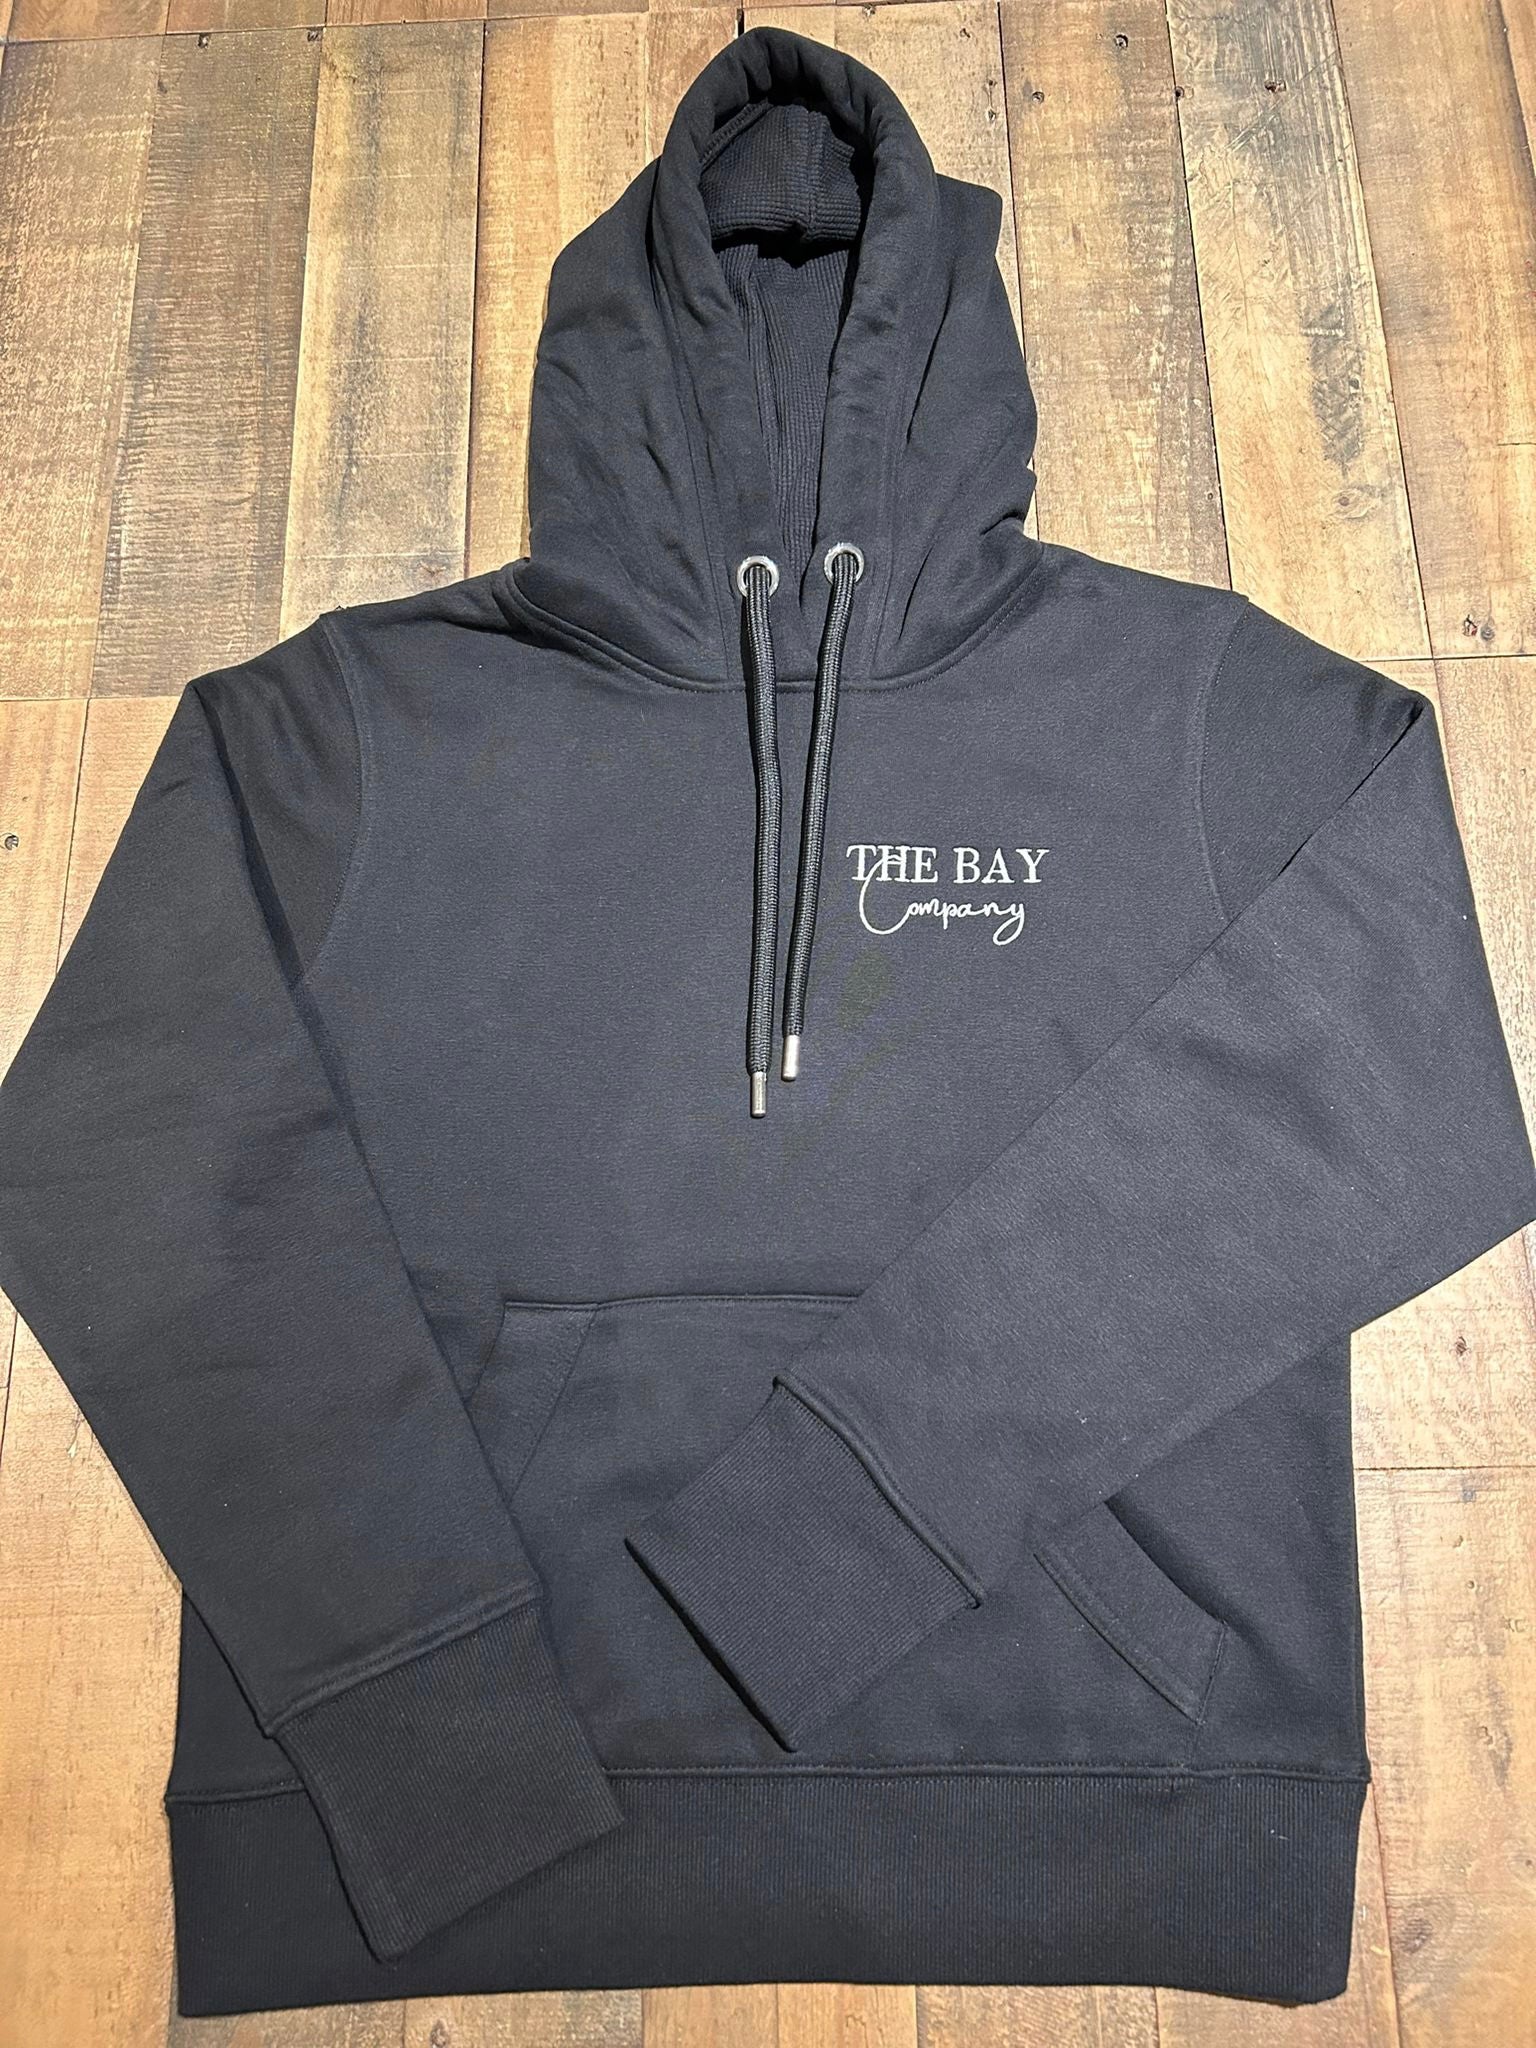 The black “follow your dreams” women’s hoodie from the bay company